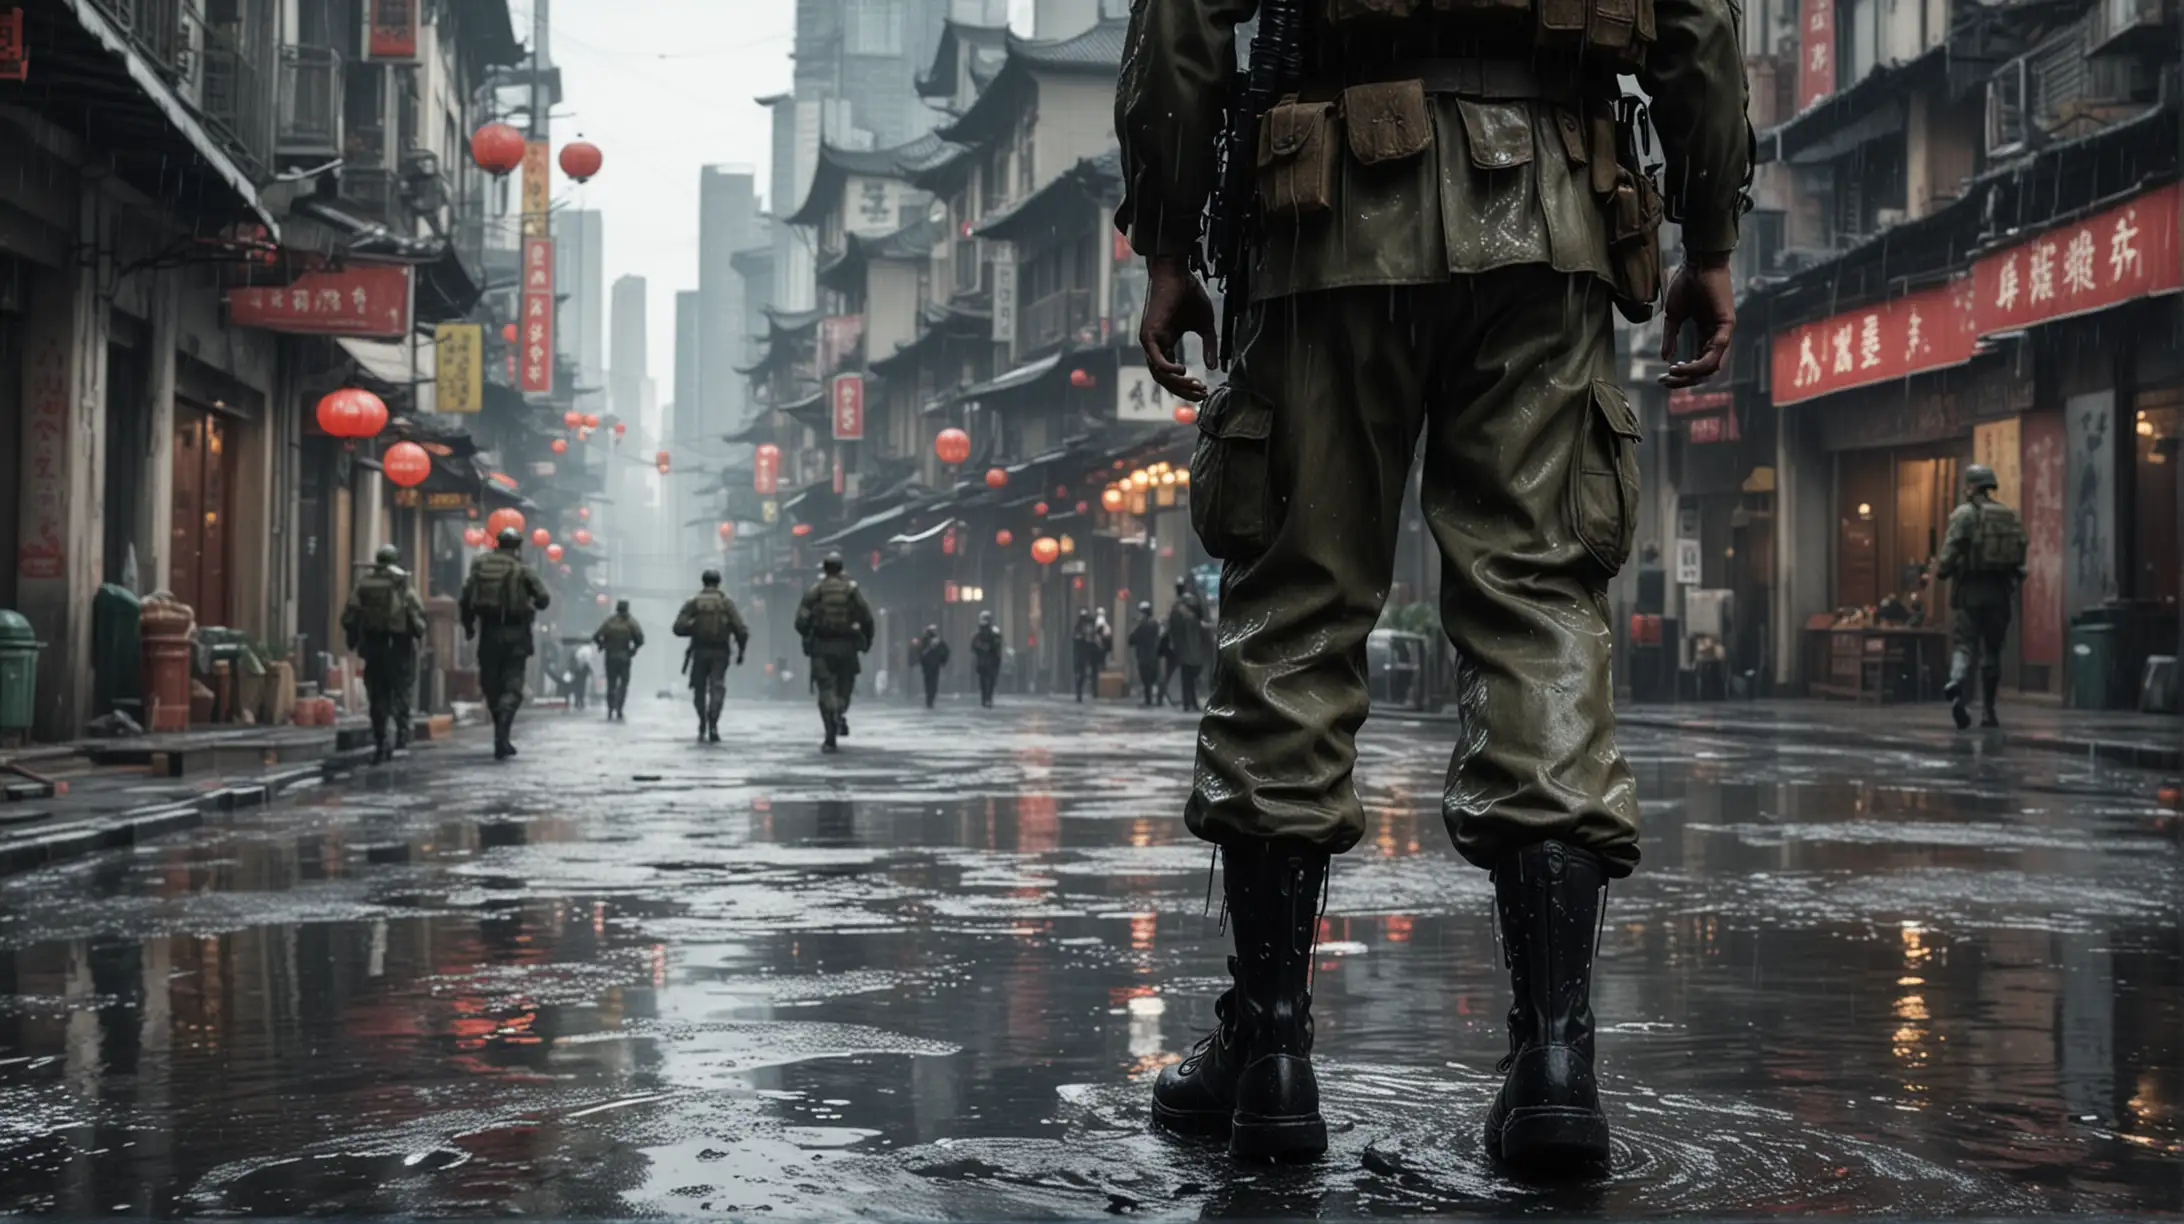 Soldiers First Person View of Squad Walking in Wet Shanghai Street